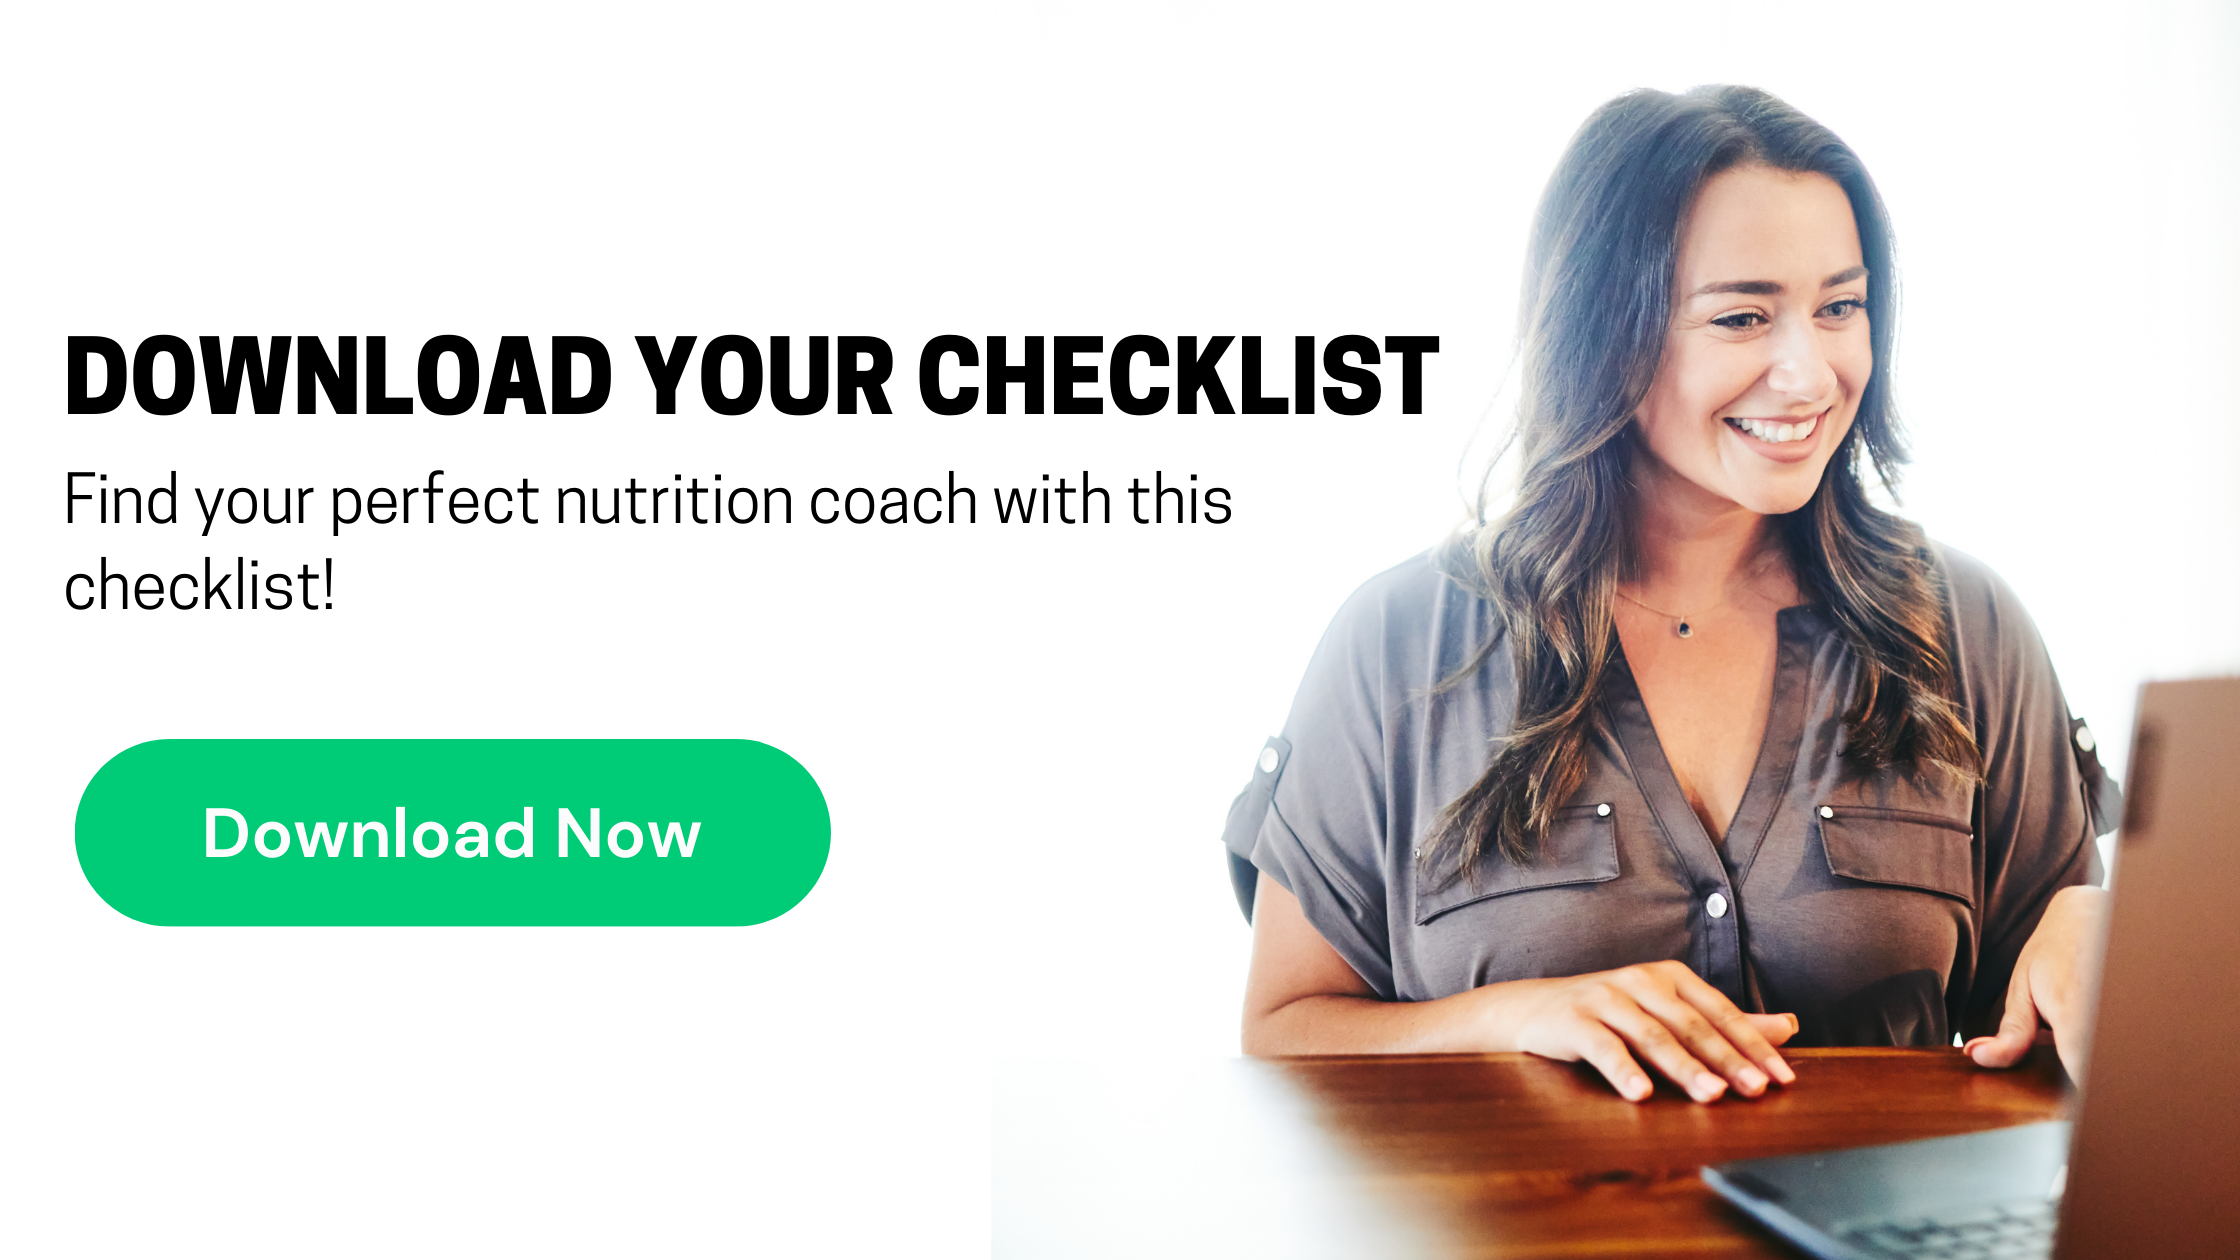 Qualifications of Nutrition Coaches and Registered Dietitians